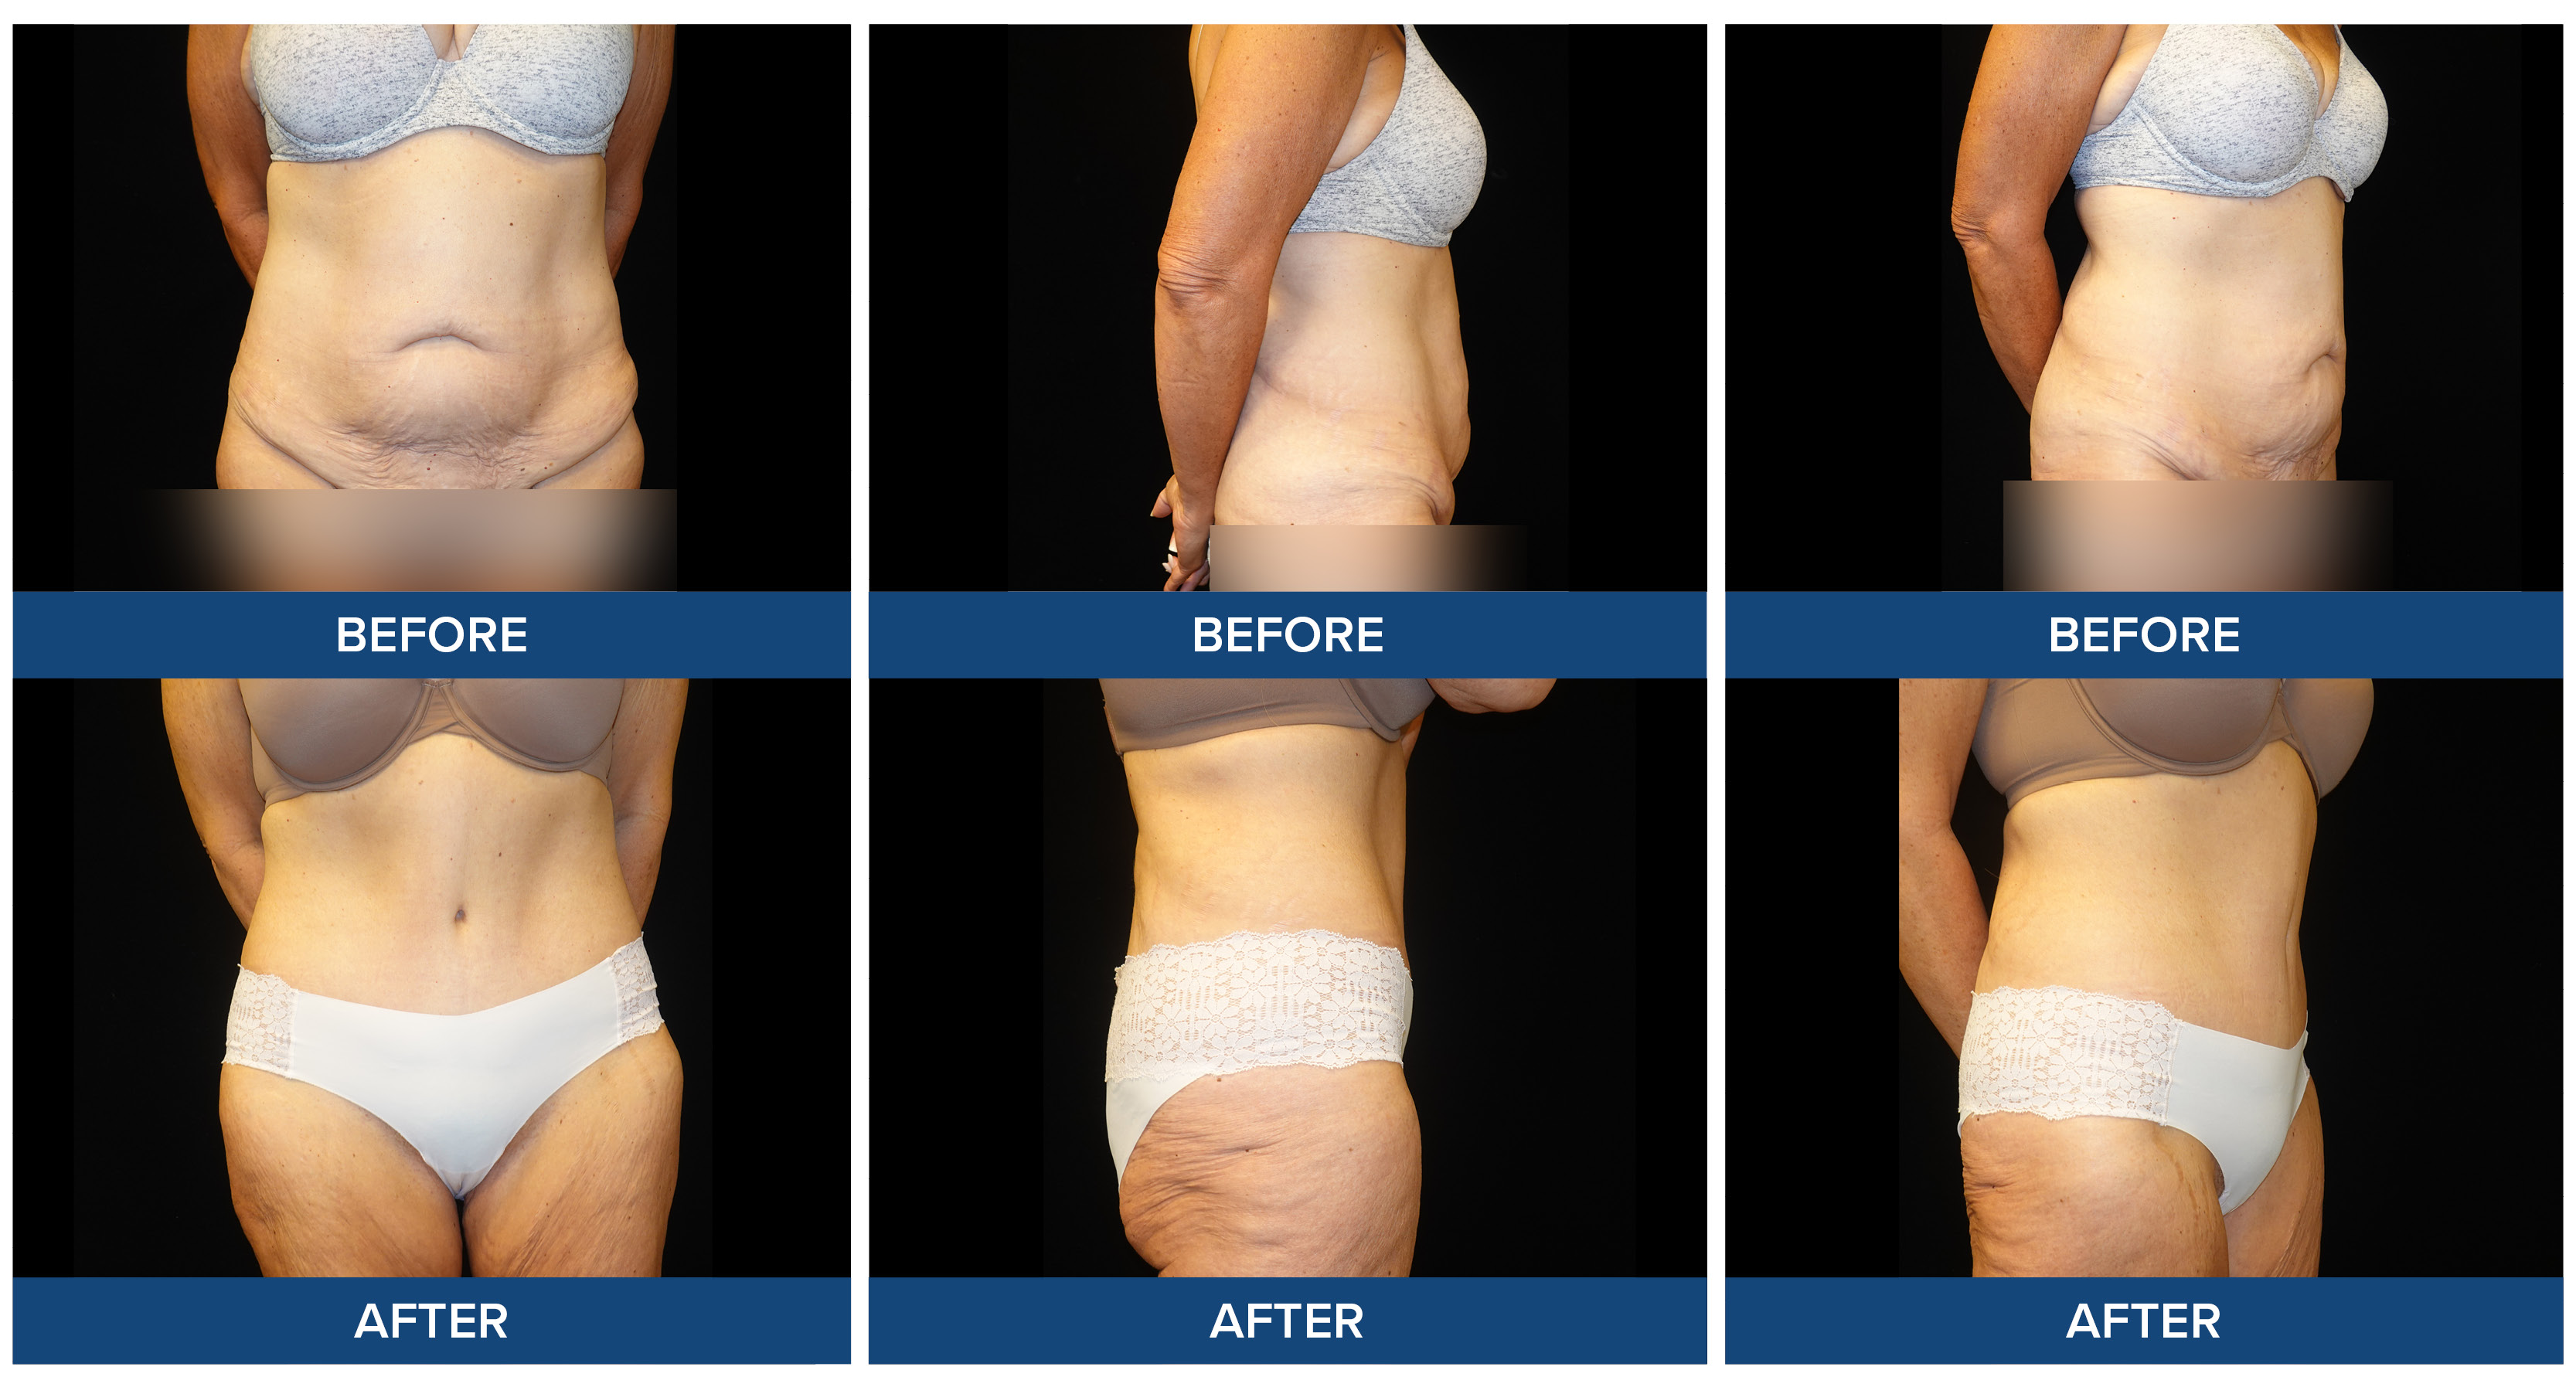 Female patient before and after photos of abdominoplasty procedure.